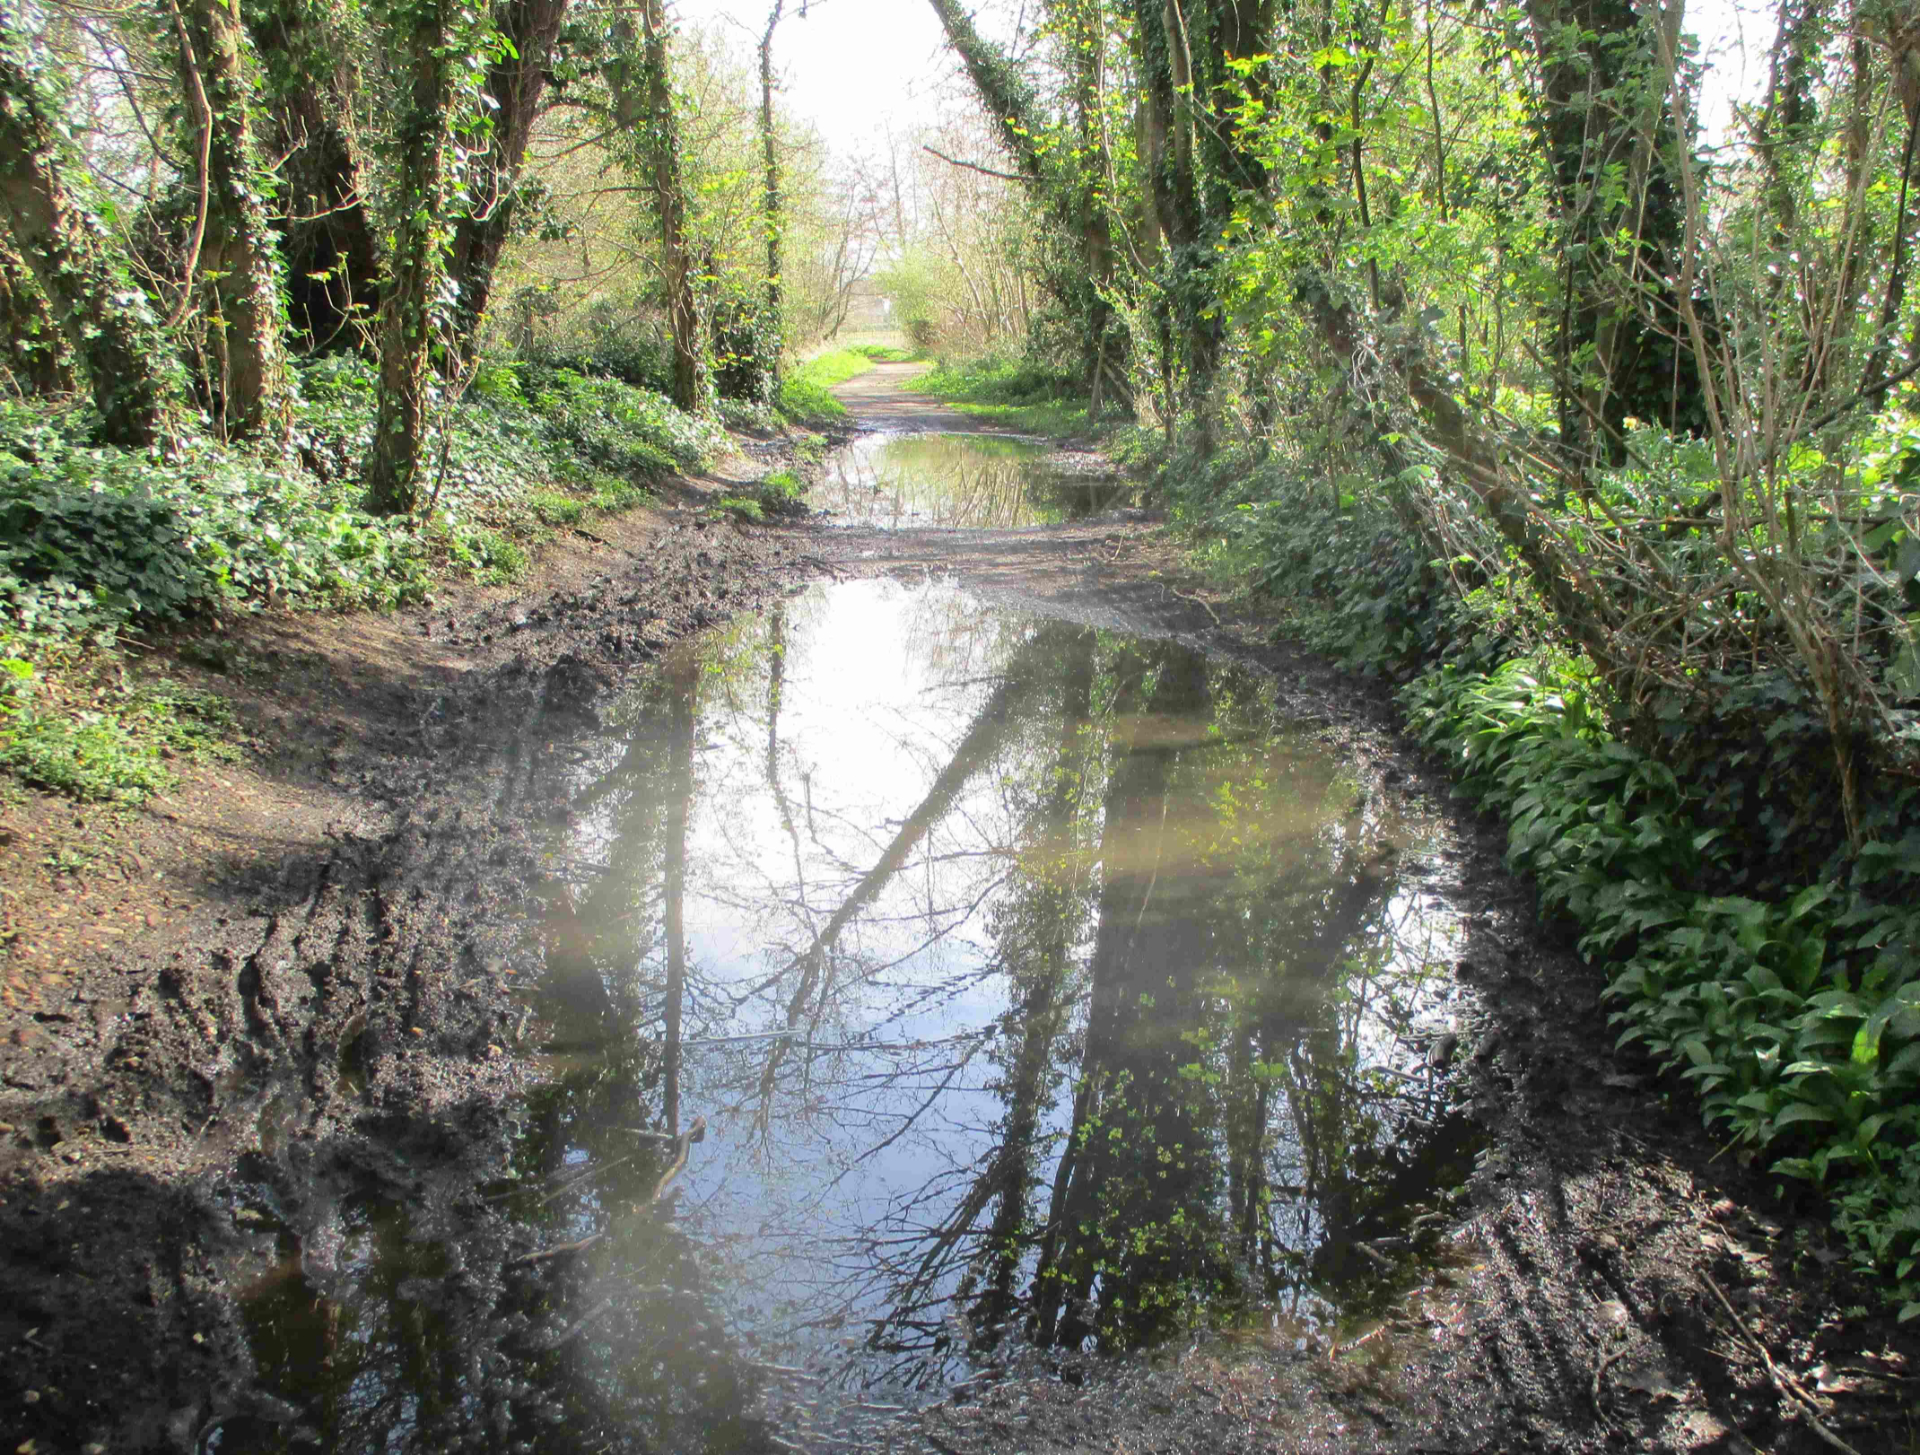 Blackwater cycle track flooded